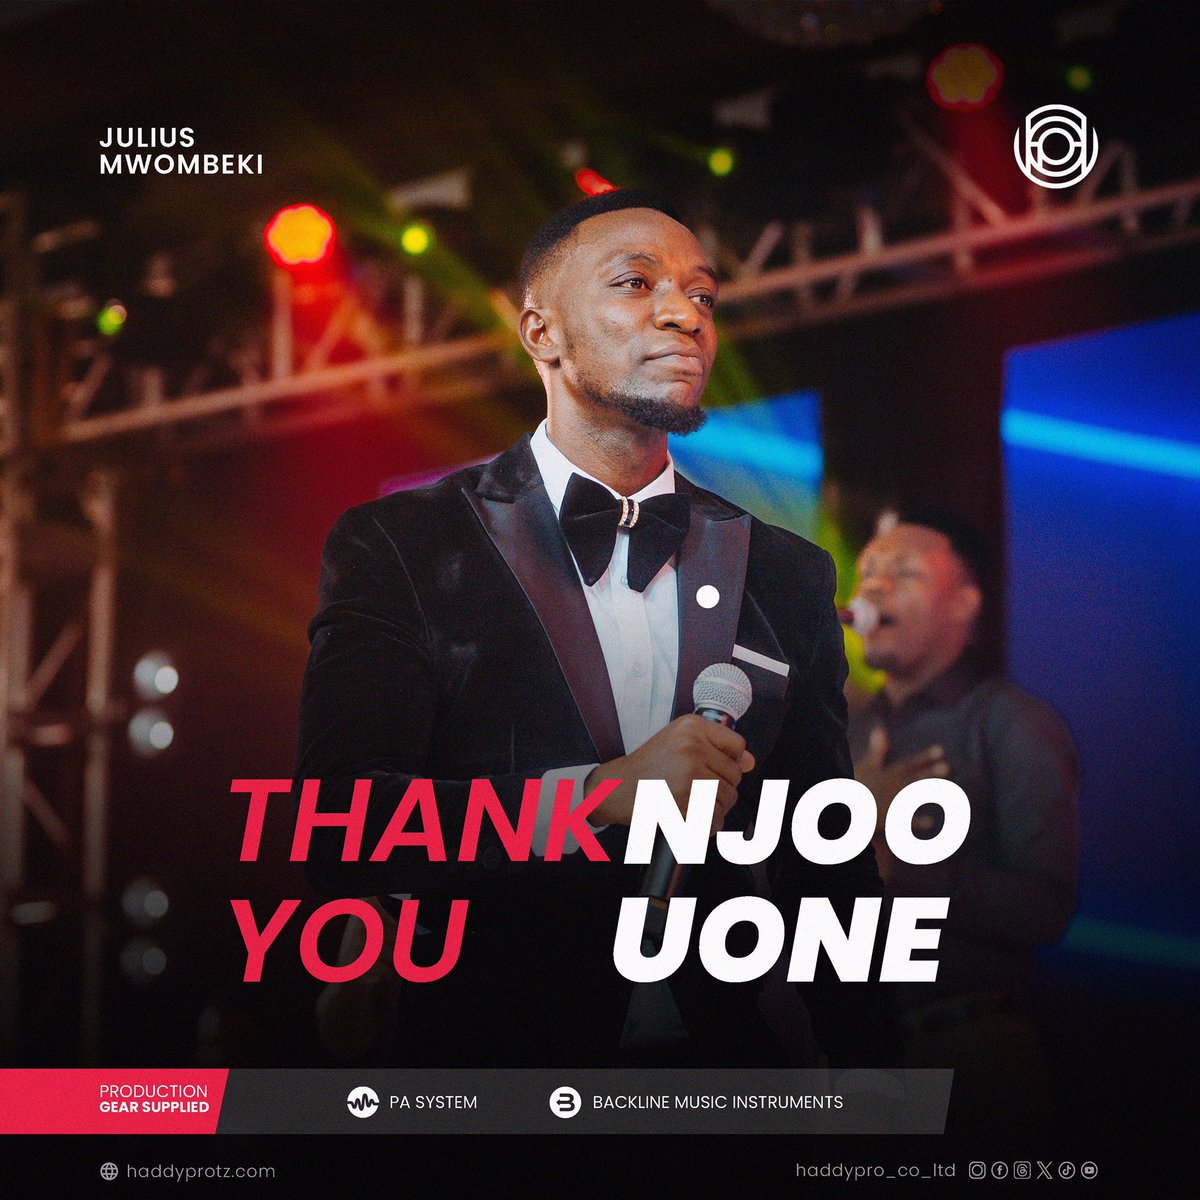 THANK YOU #NJOOUONE
_______
@haddypro_co_ltd on PA System and Backline
________
#ExperiencetheBEST